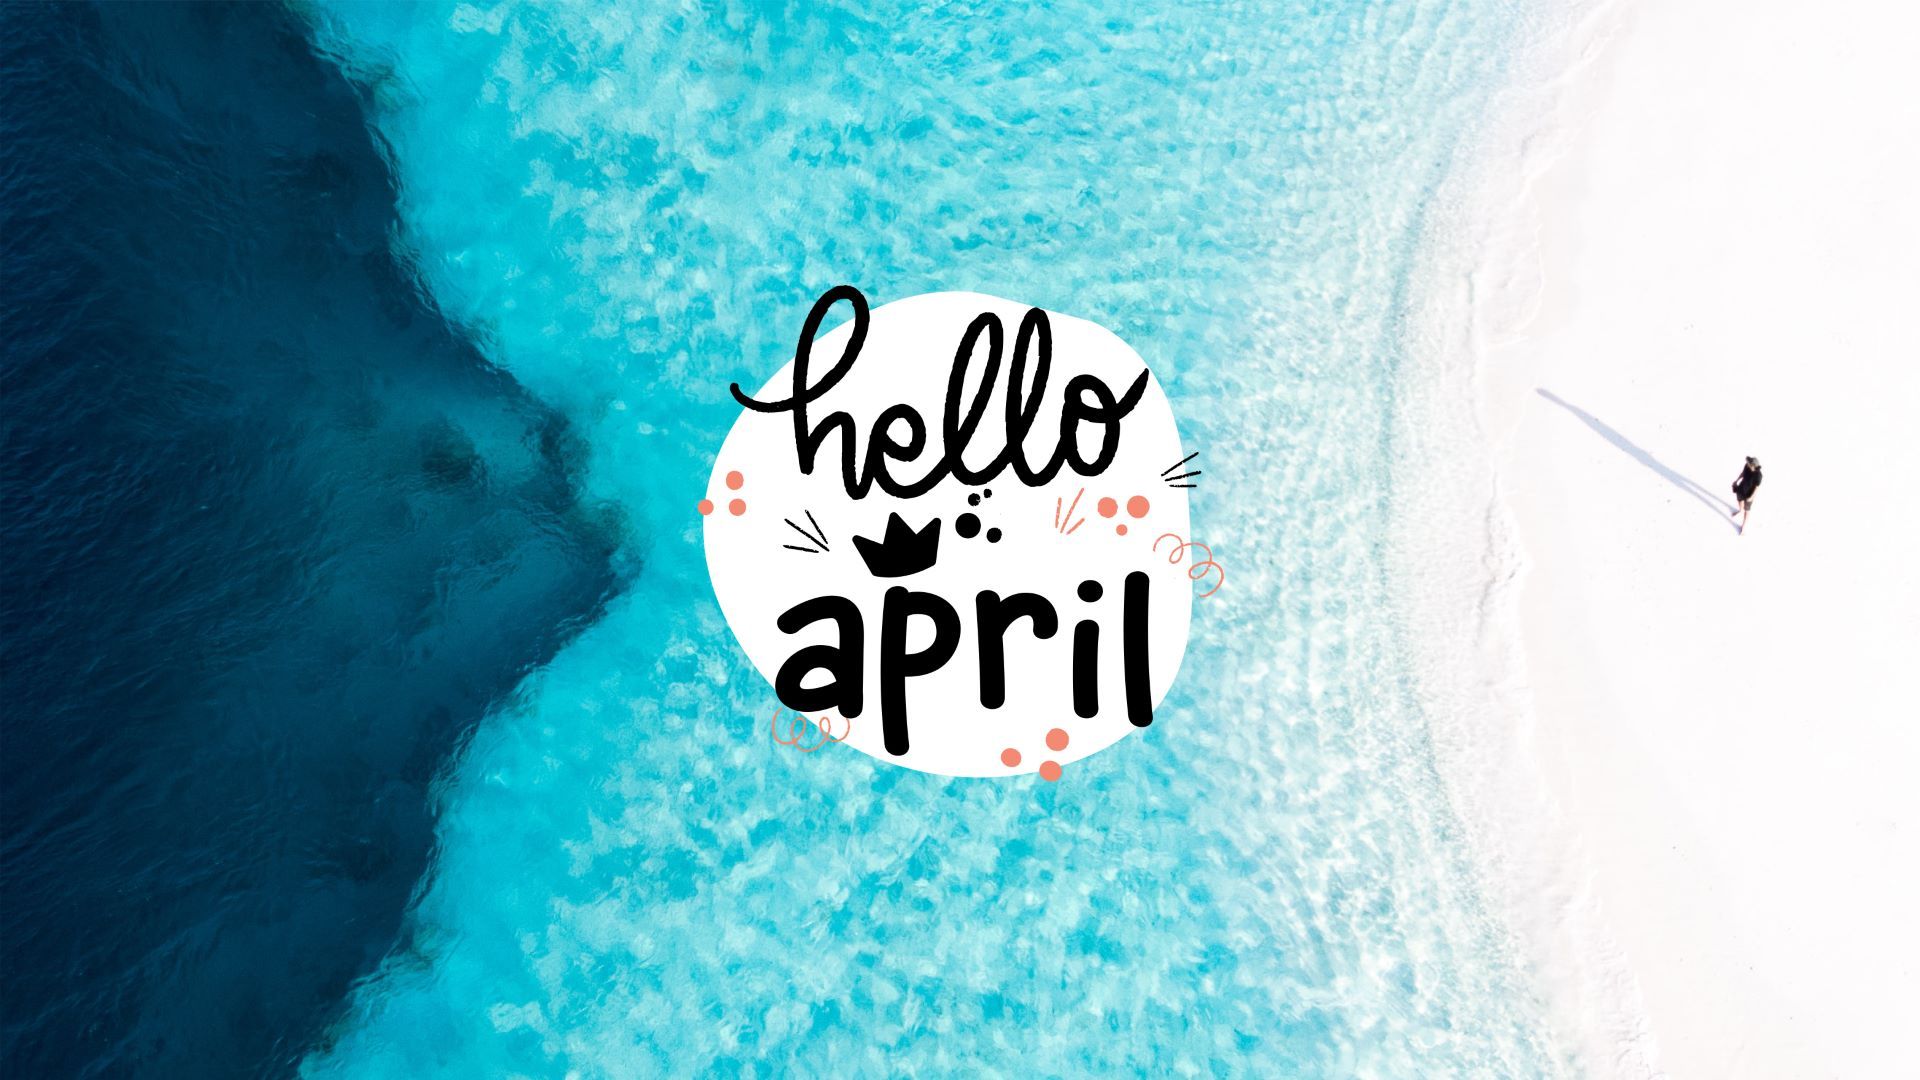 A beach with the words hello april - April, teal